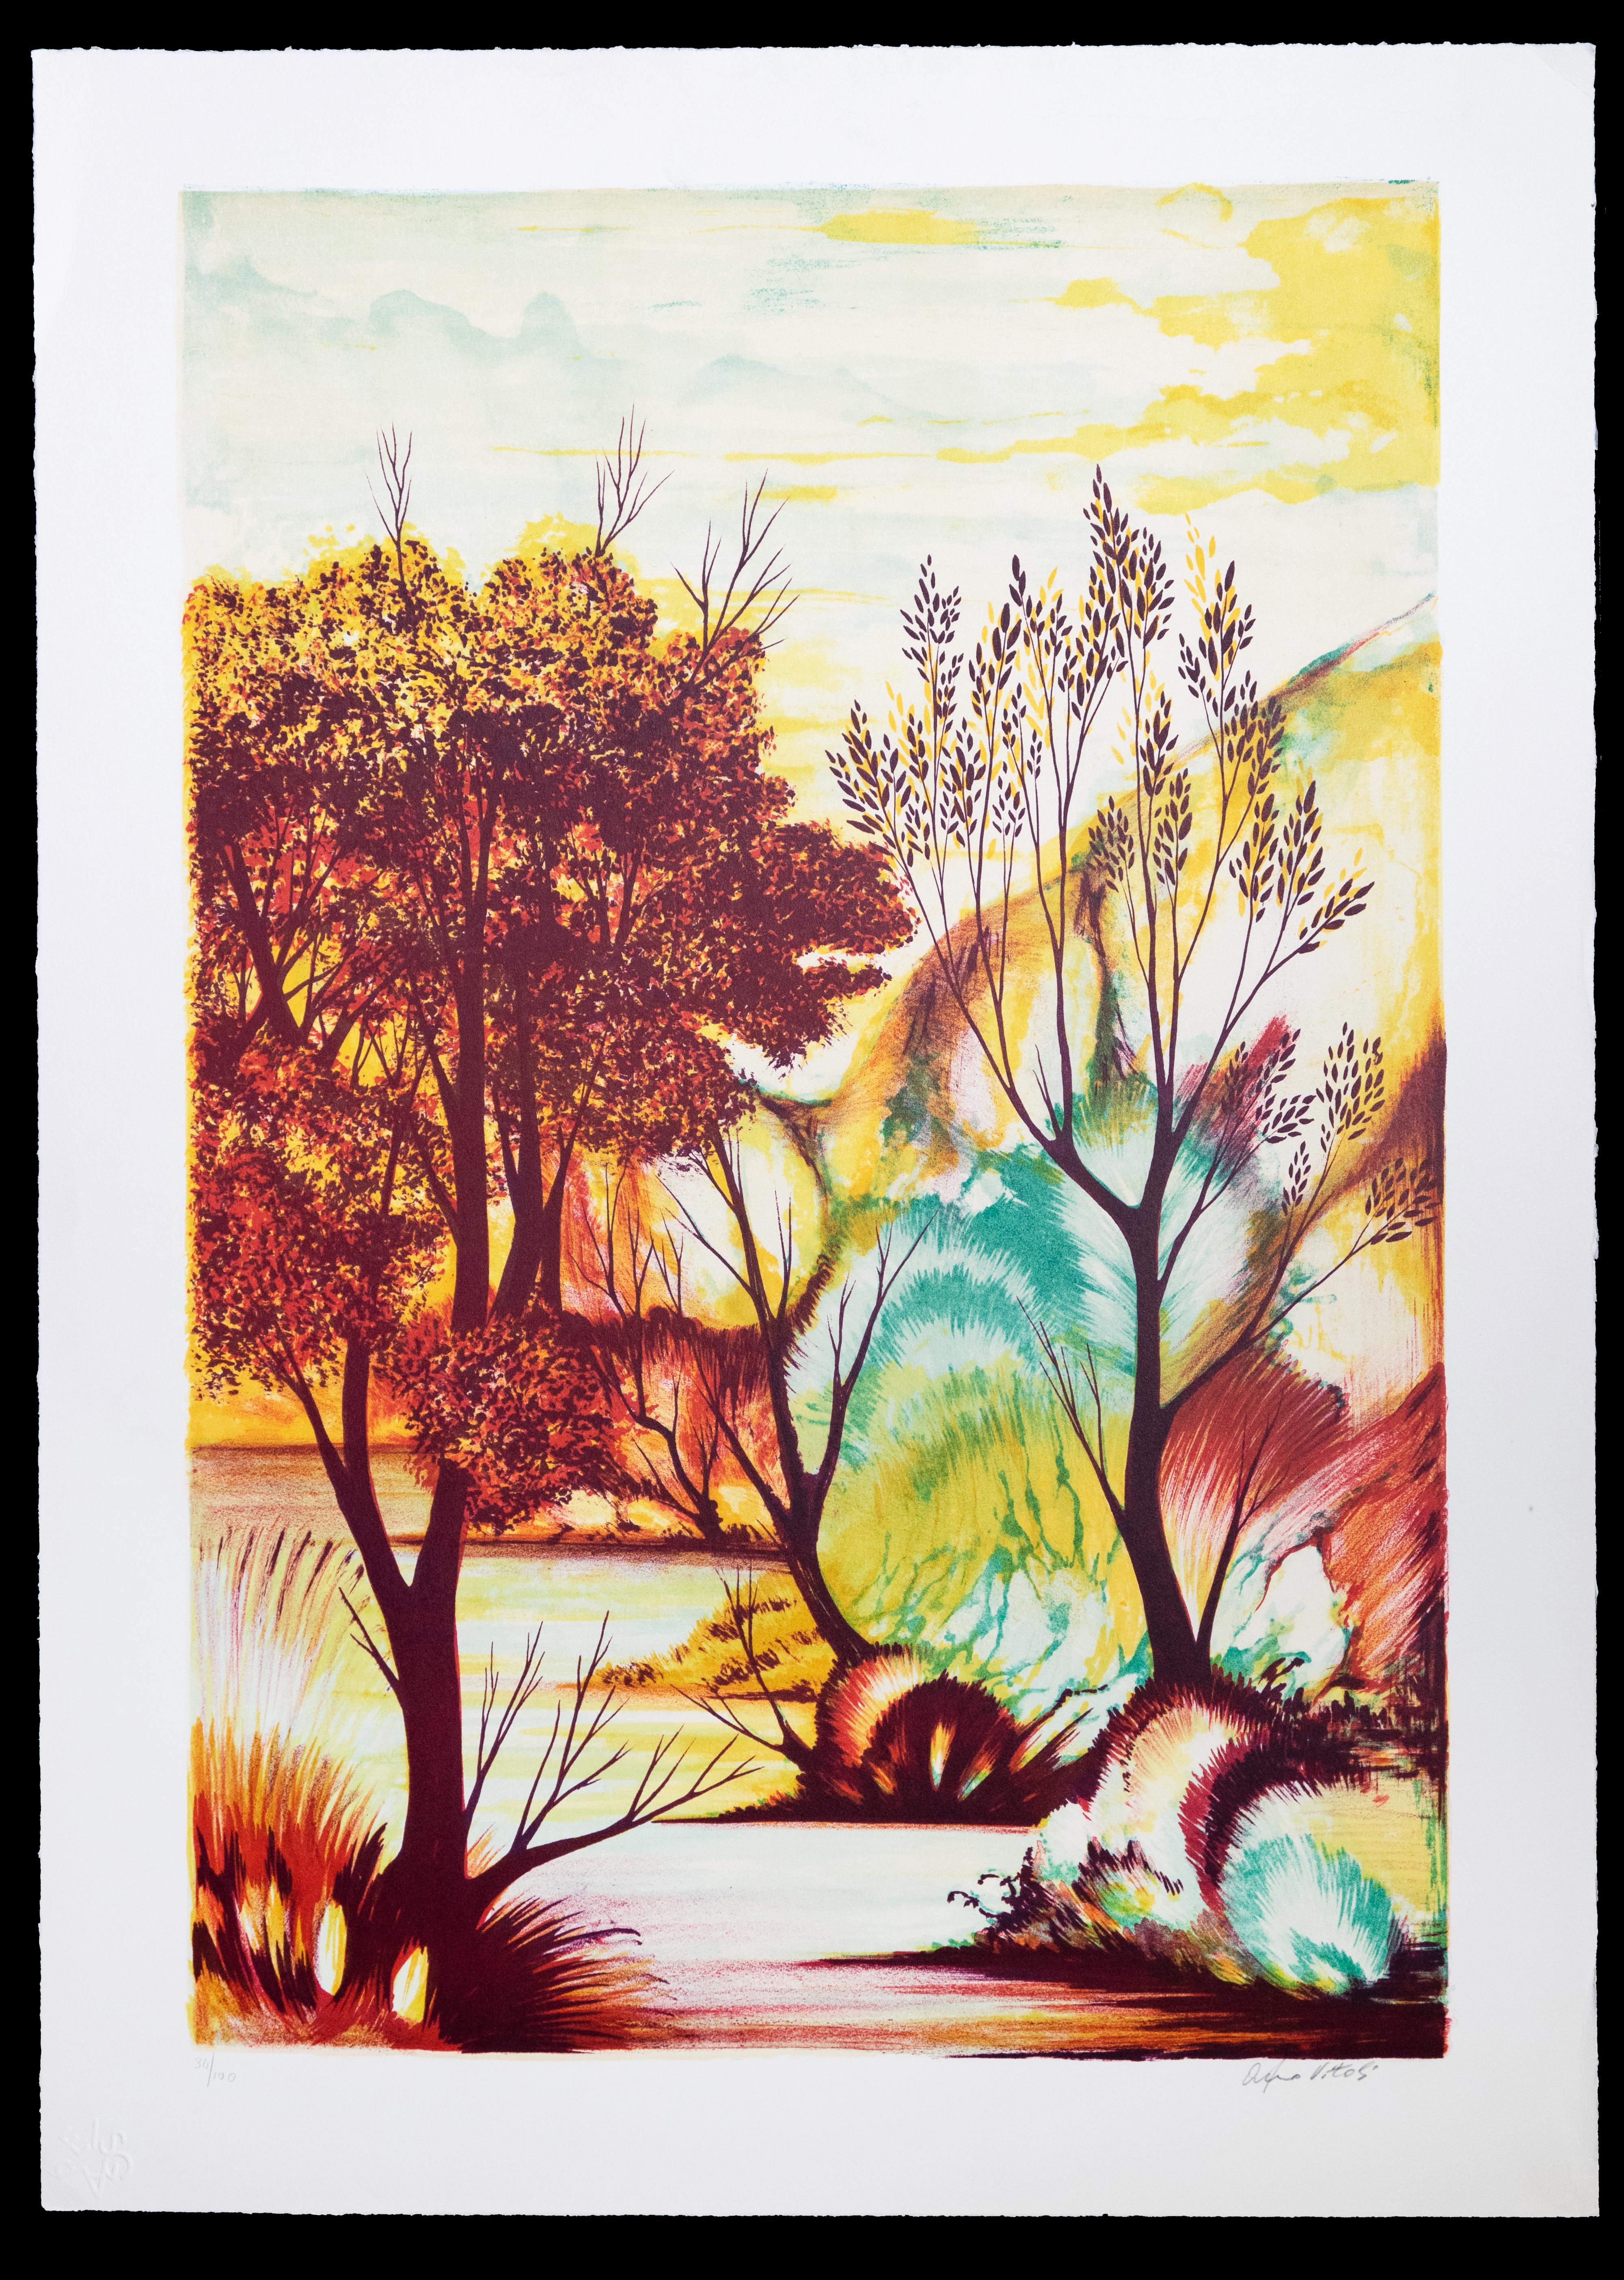 Edition of 100 prints, hand signed. Beautiful representation of Autumn colors, designed by the italian artist Orfeo Vitali and printed by Atelier Franco Cioppi.	
Excellent condition.
